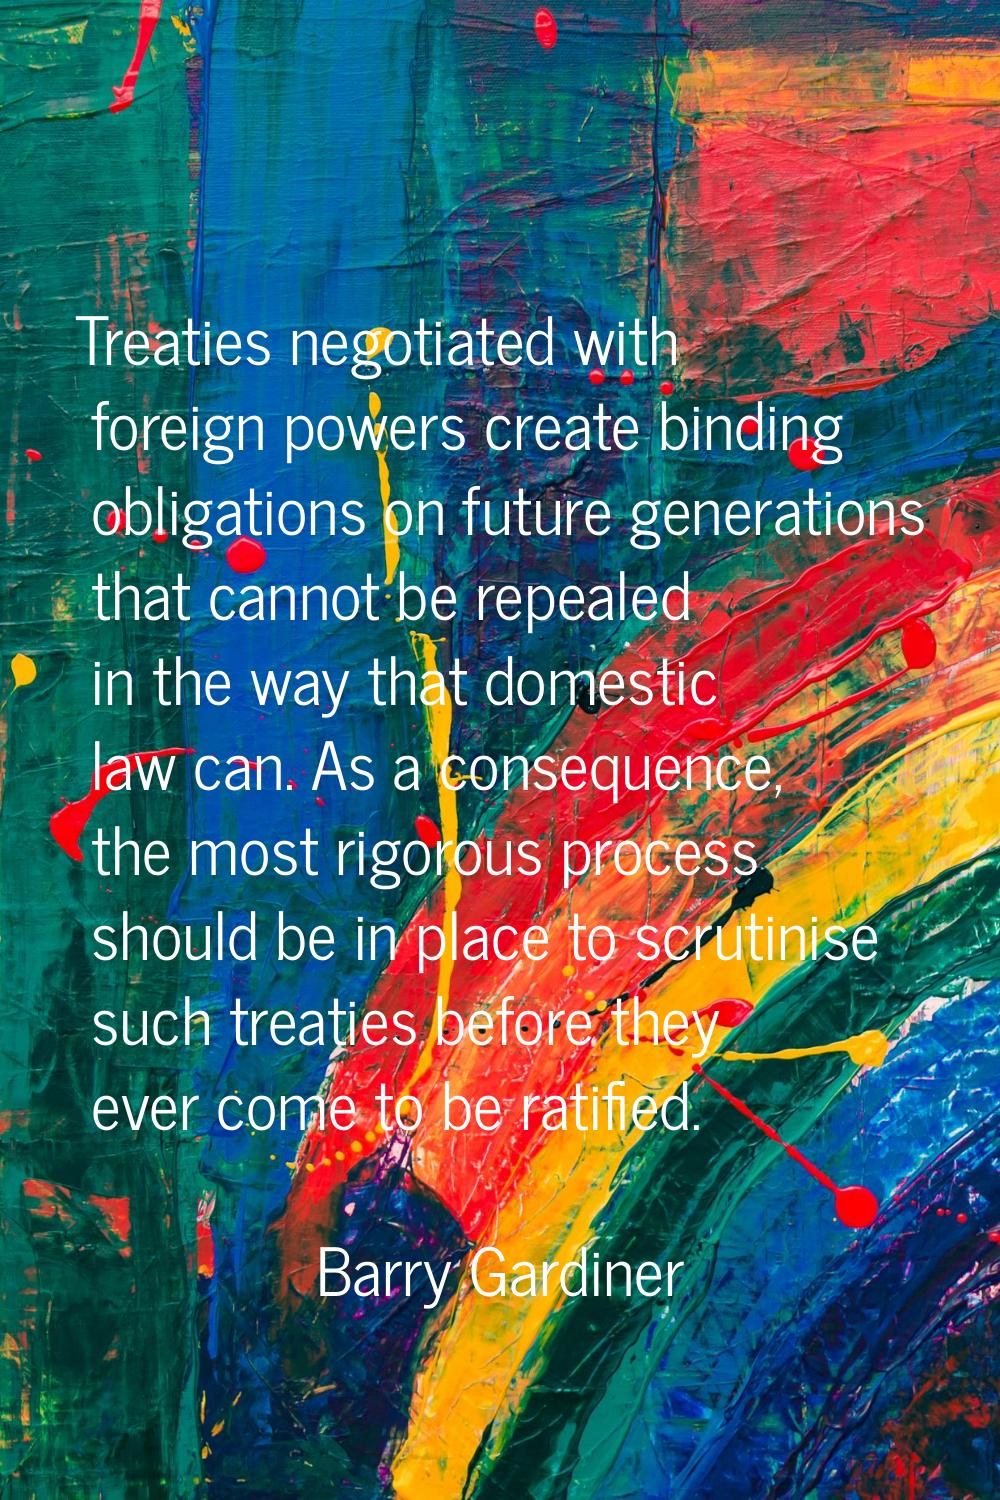 Treaties negotiated with foreign powers create binding obligations on future generations that canno